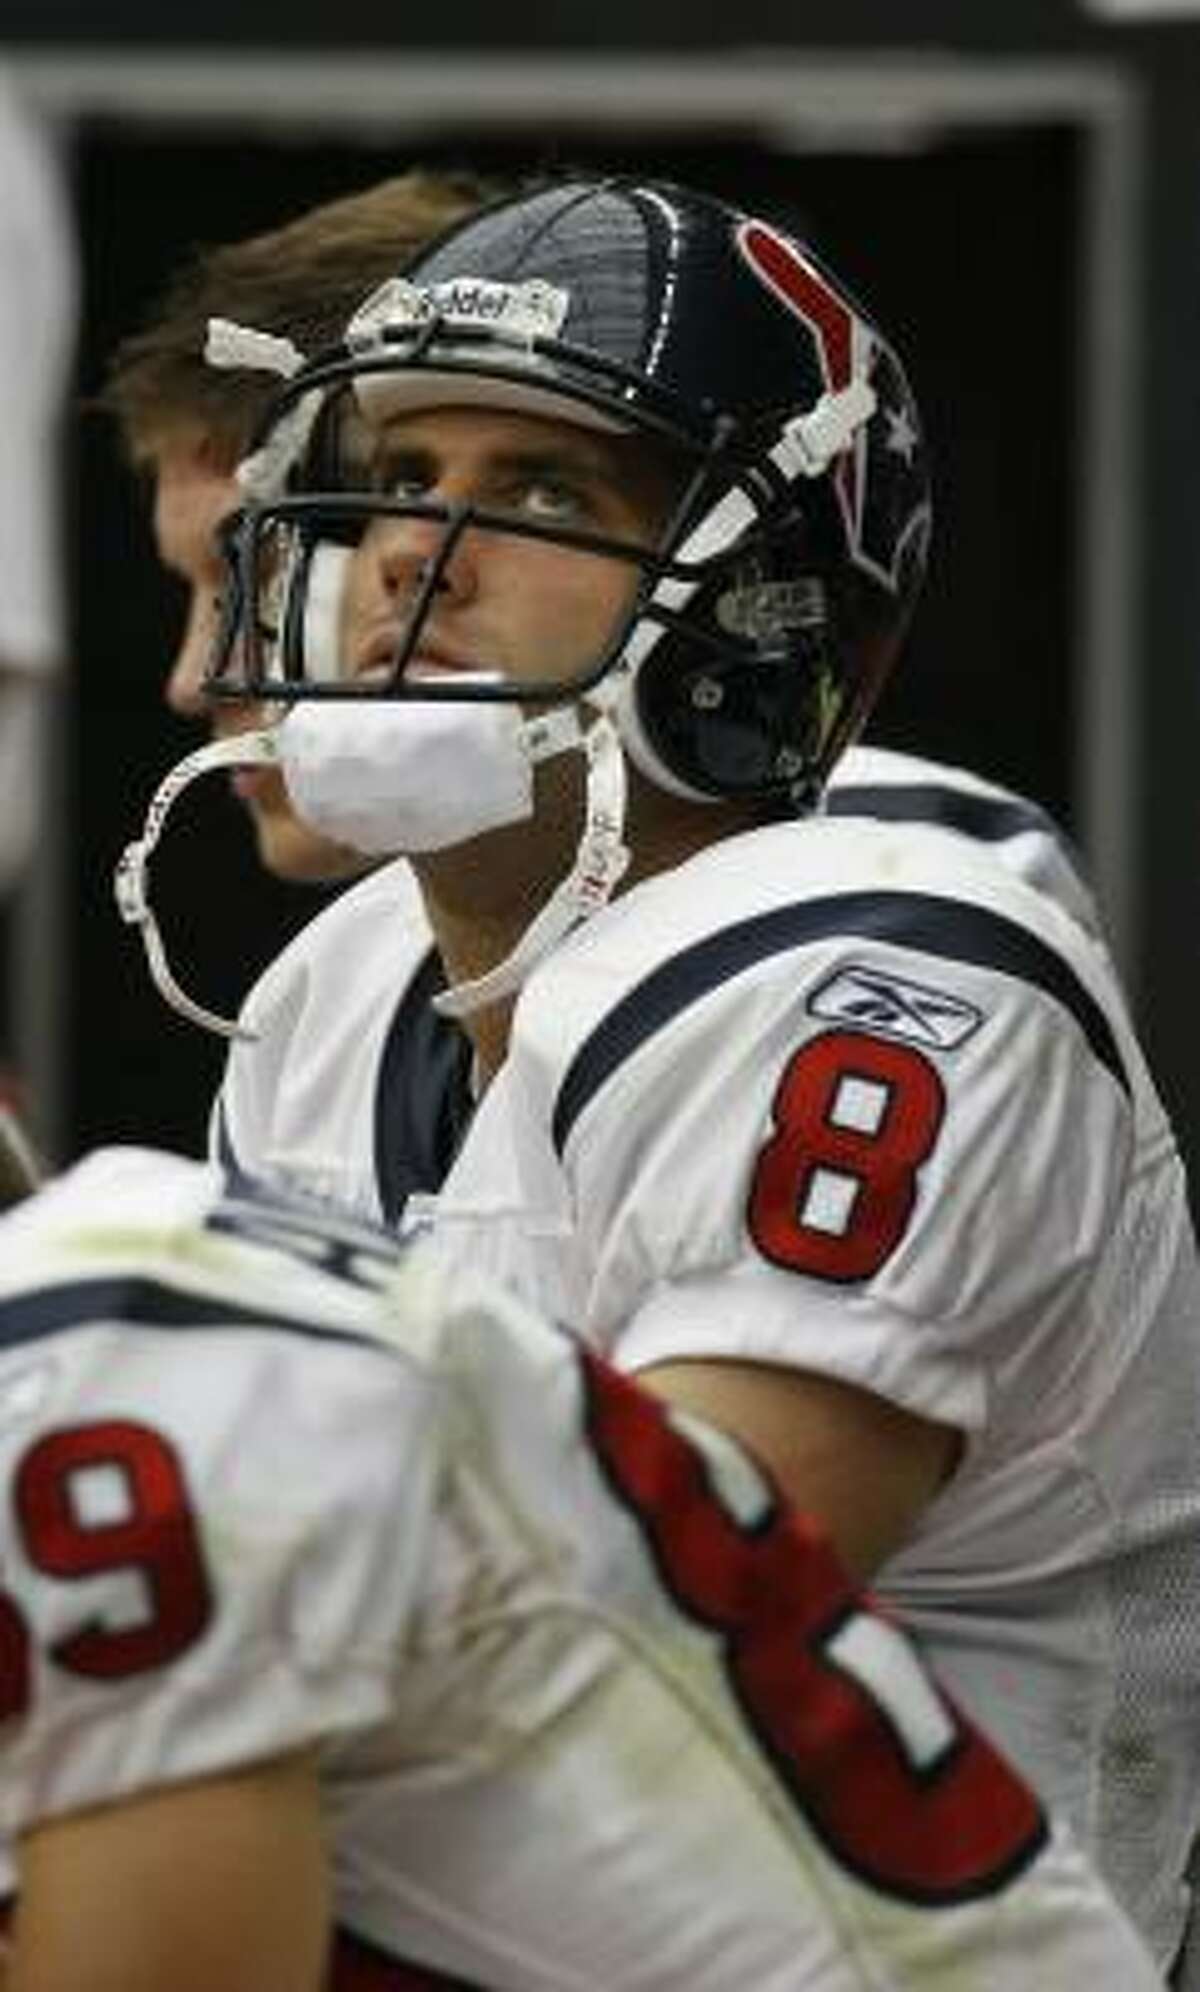 Matt Schaub is relegated to spectator in the fourth quarter after being knocked out of the game by a hard hit from Tennessee's Albert Haynesworth.